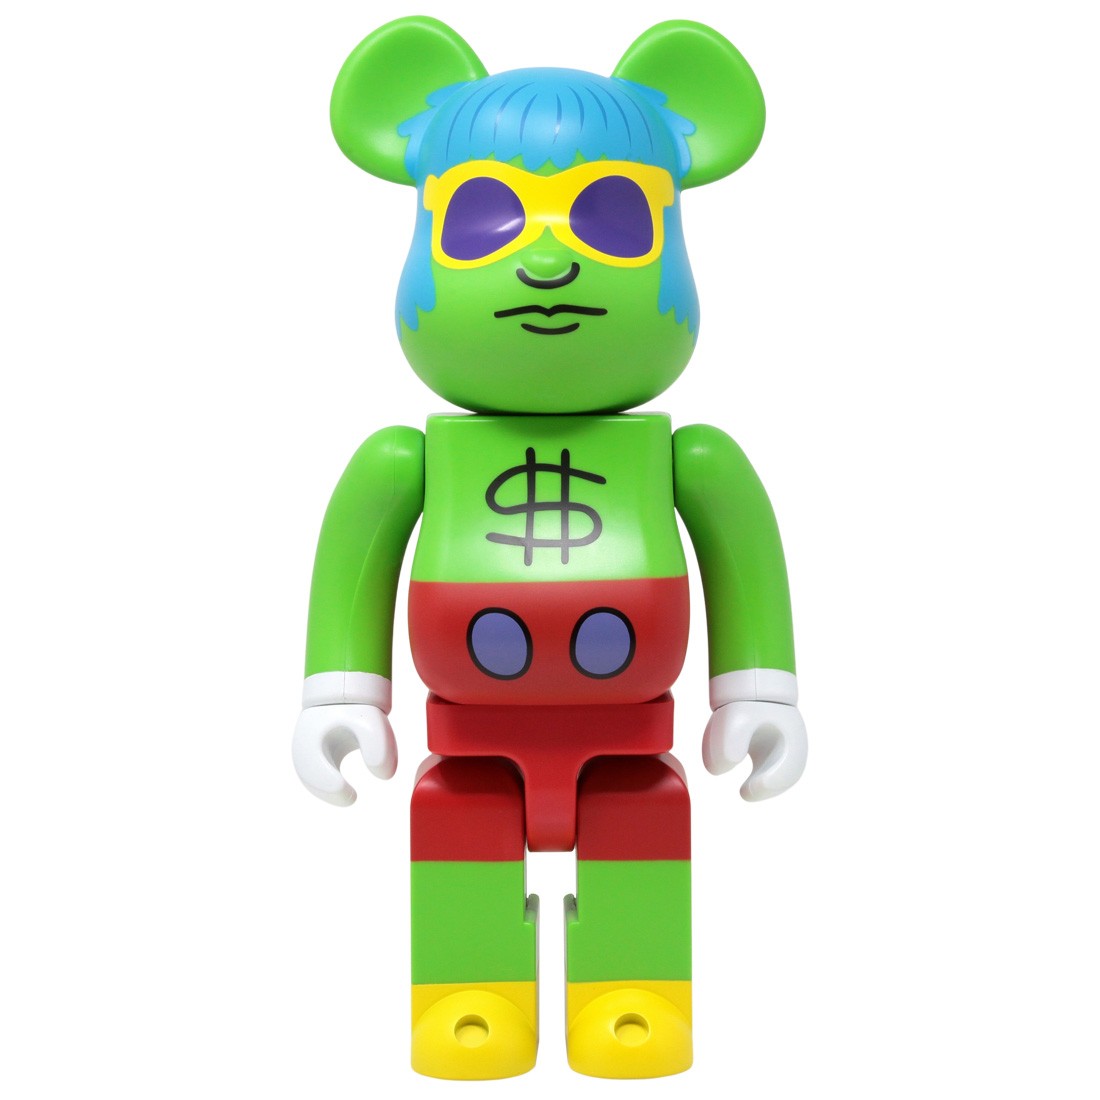 Medicom Keith Haring Andy Mouse 400% Bearbrick Figure green